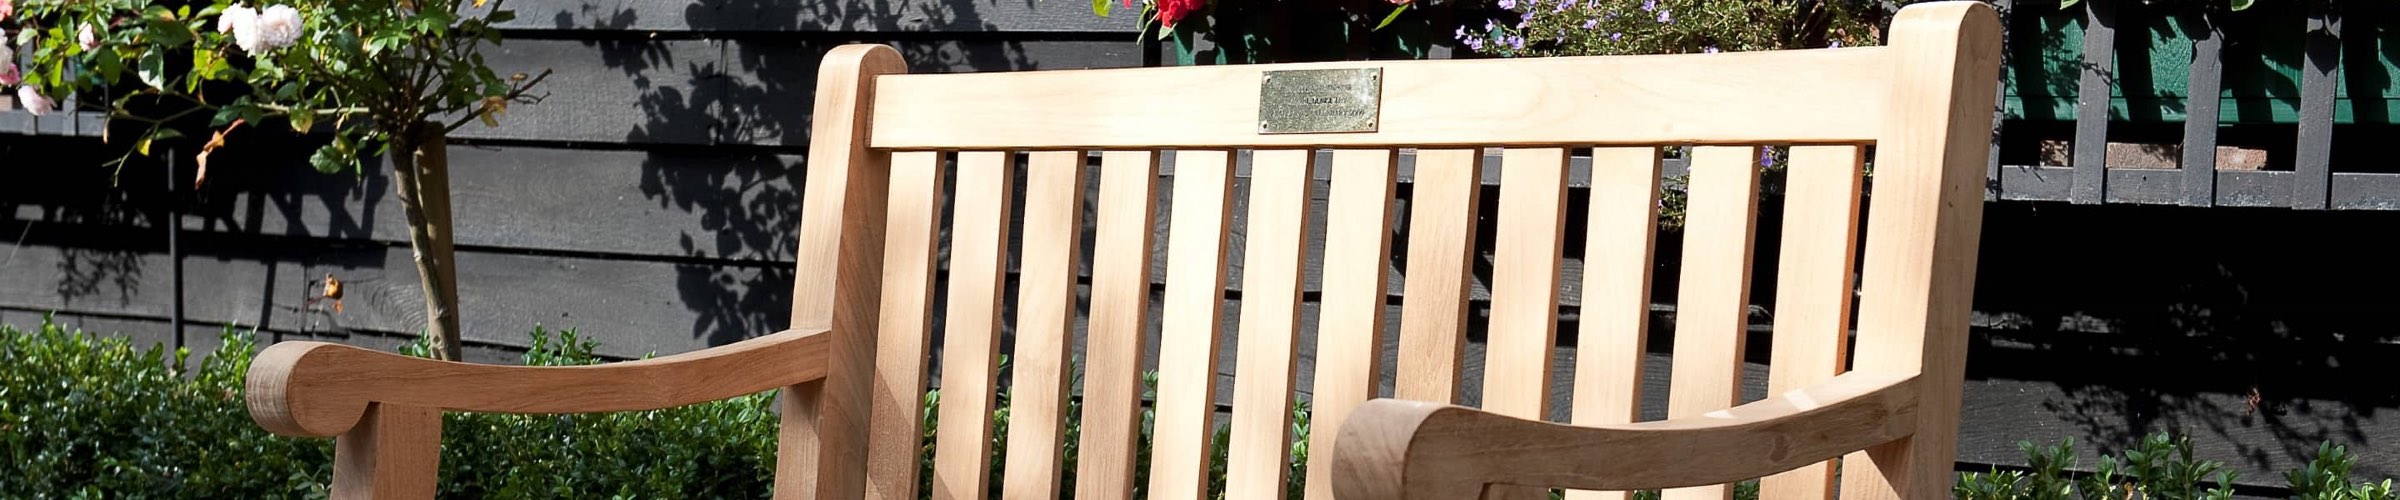 2 Seater Memorial Benches